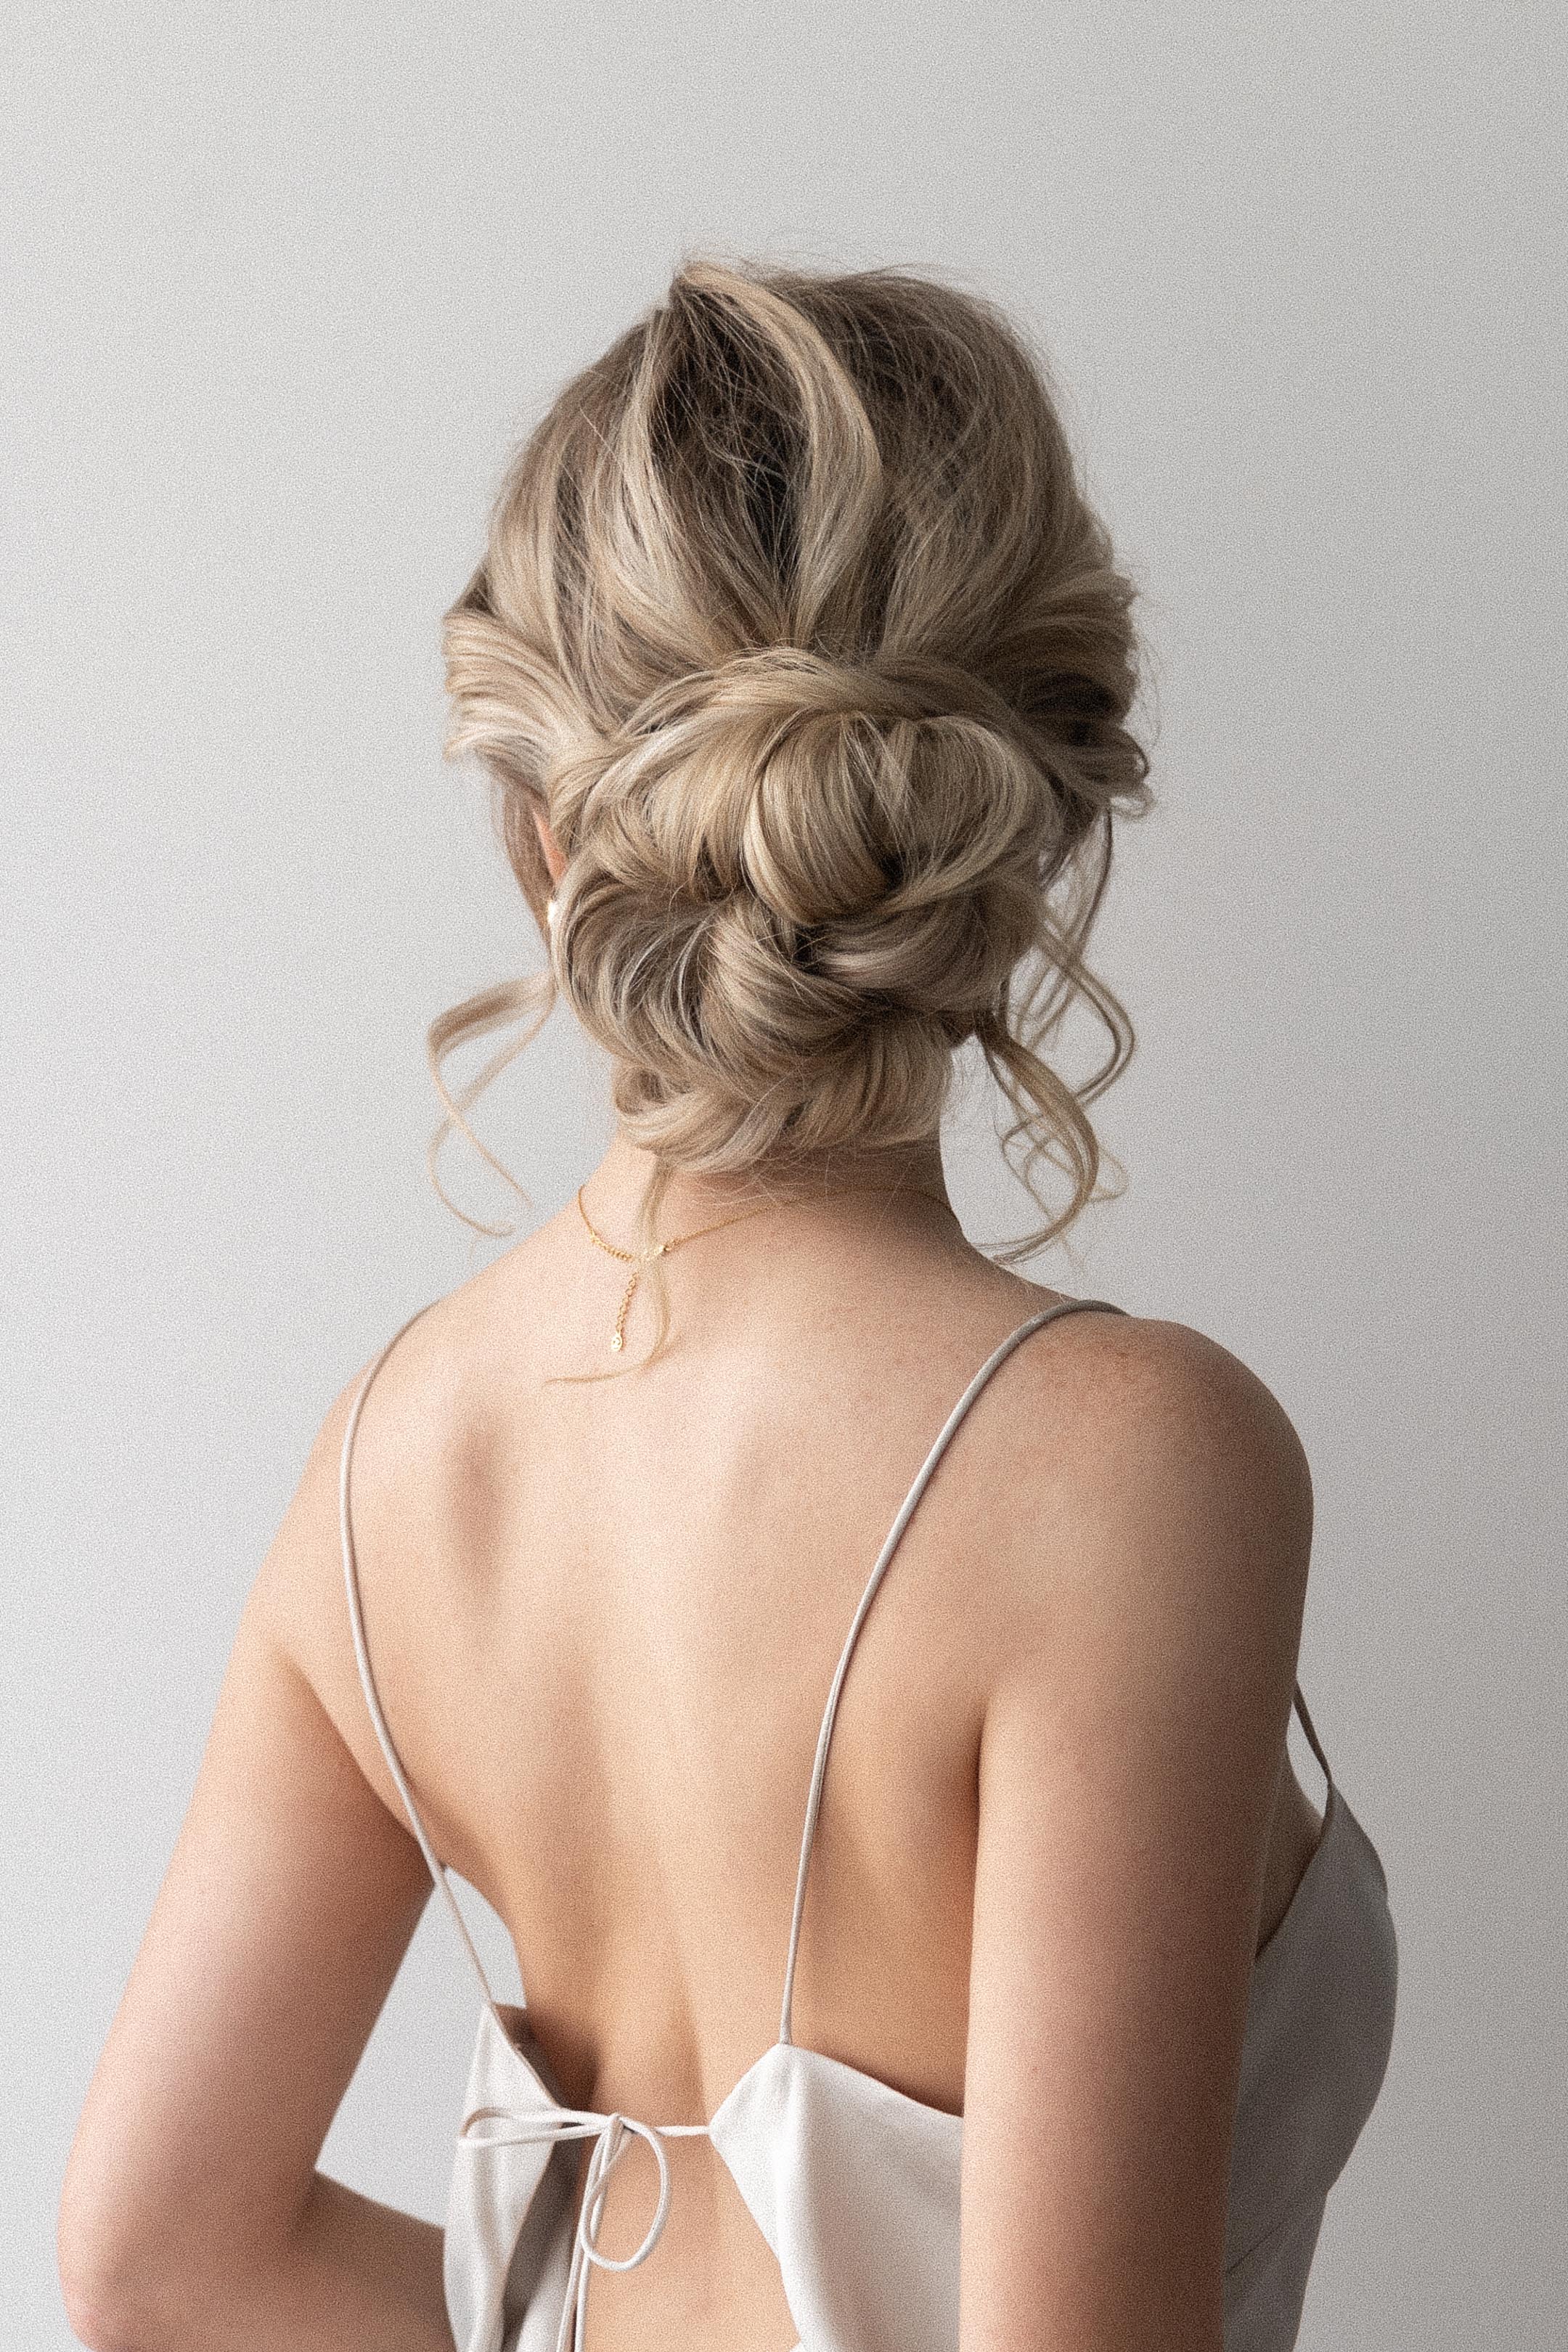 13 Sophisticated Sleek Low Bun for Women  Hairstyle Laboratory